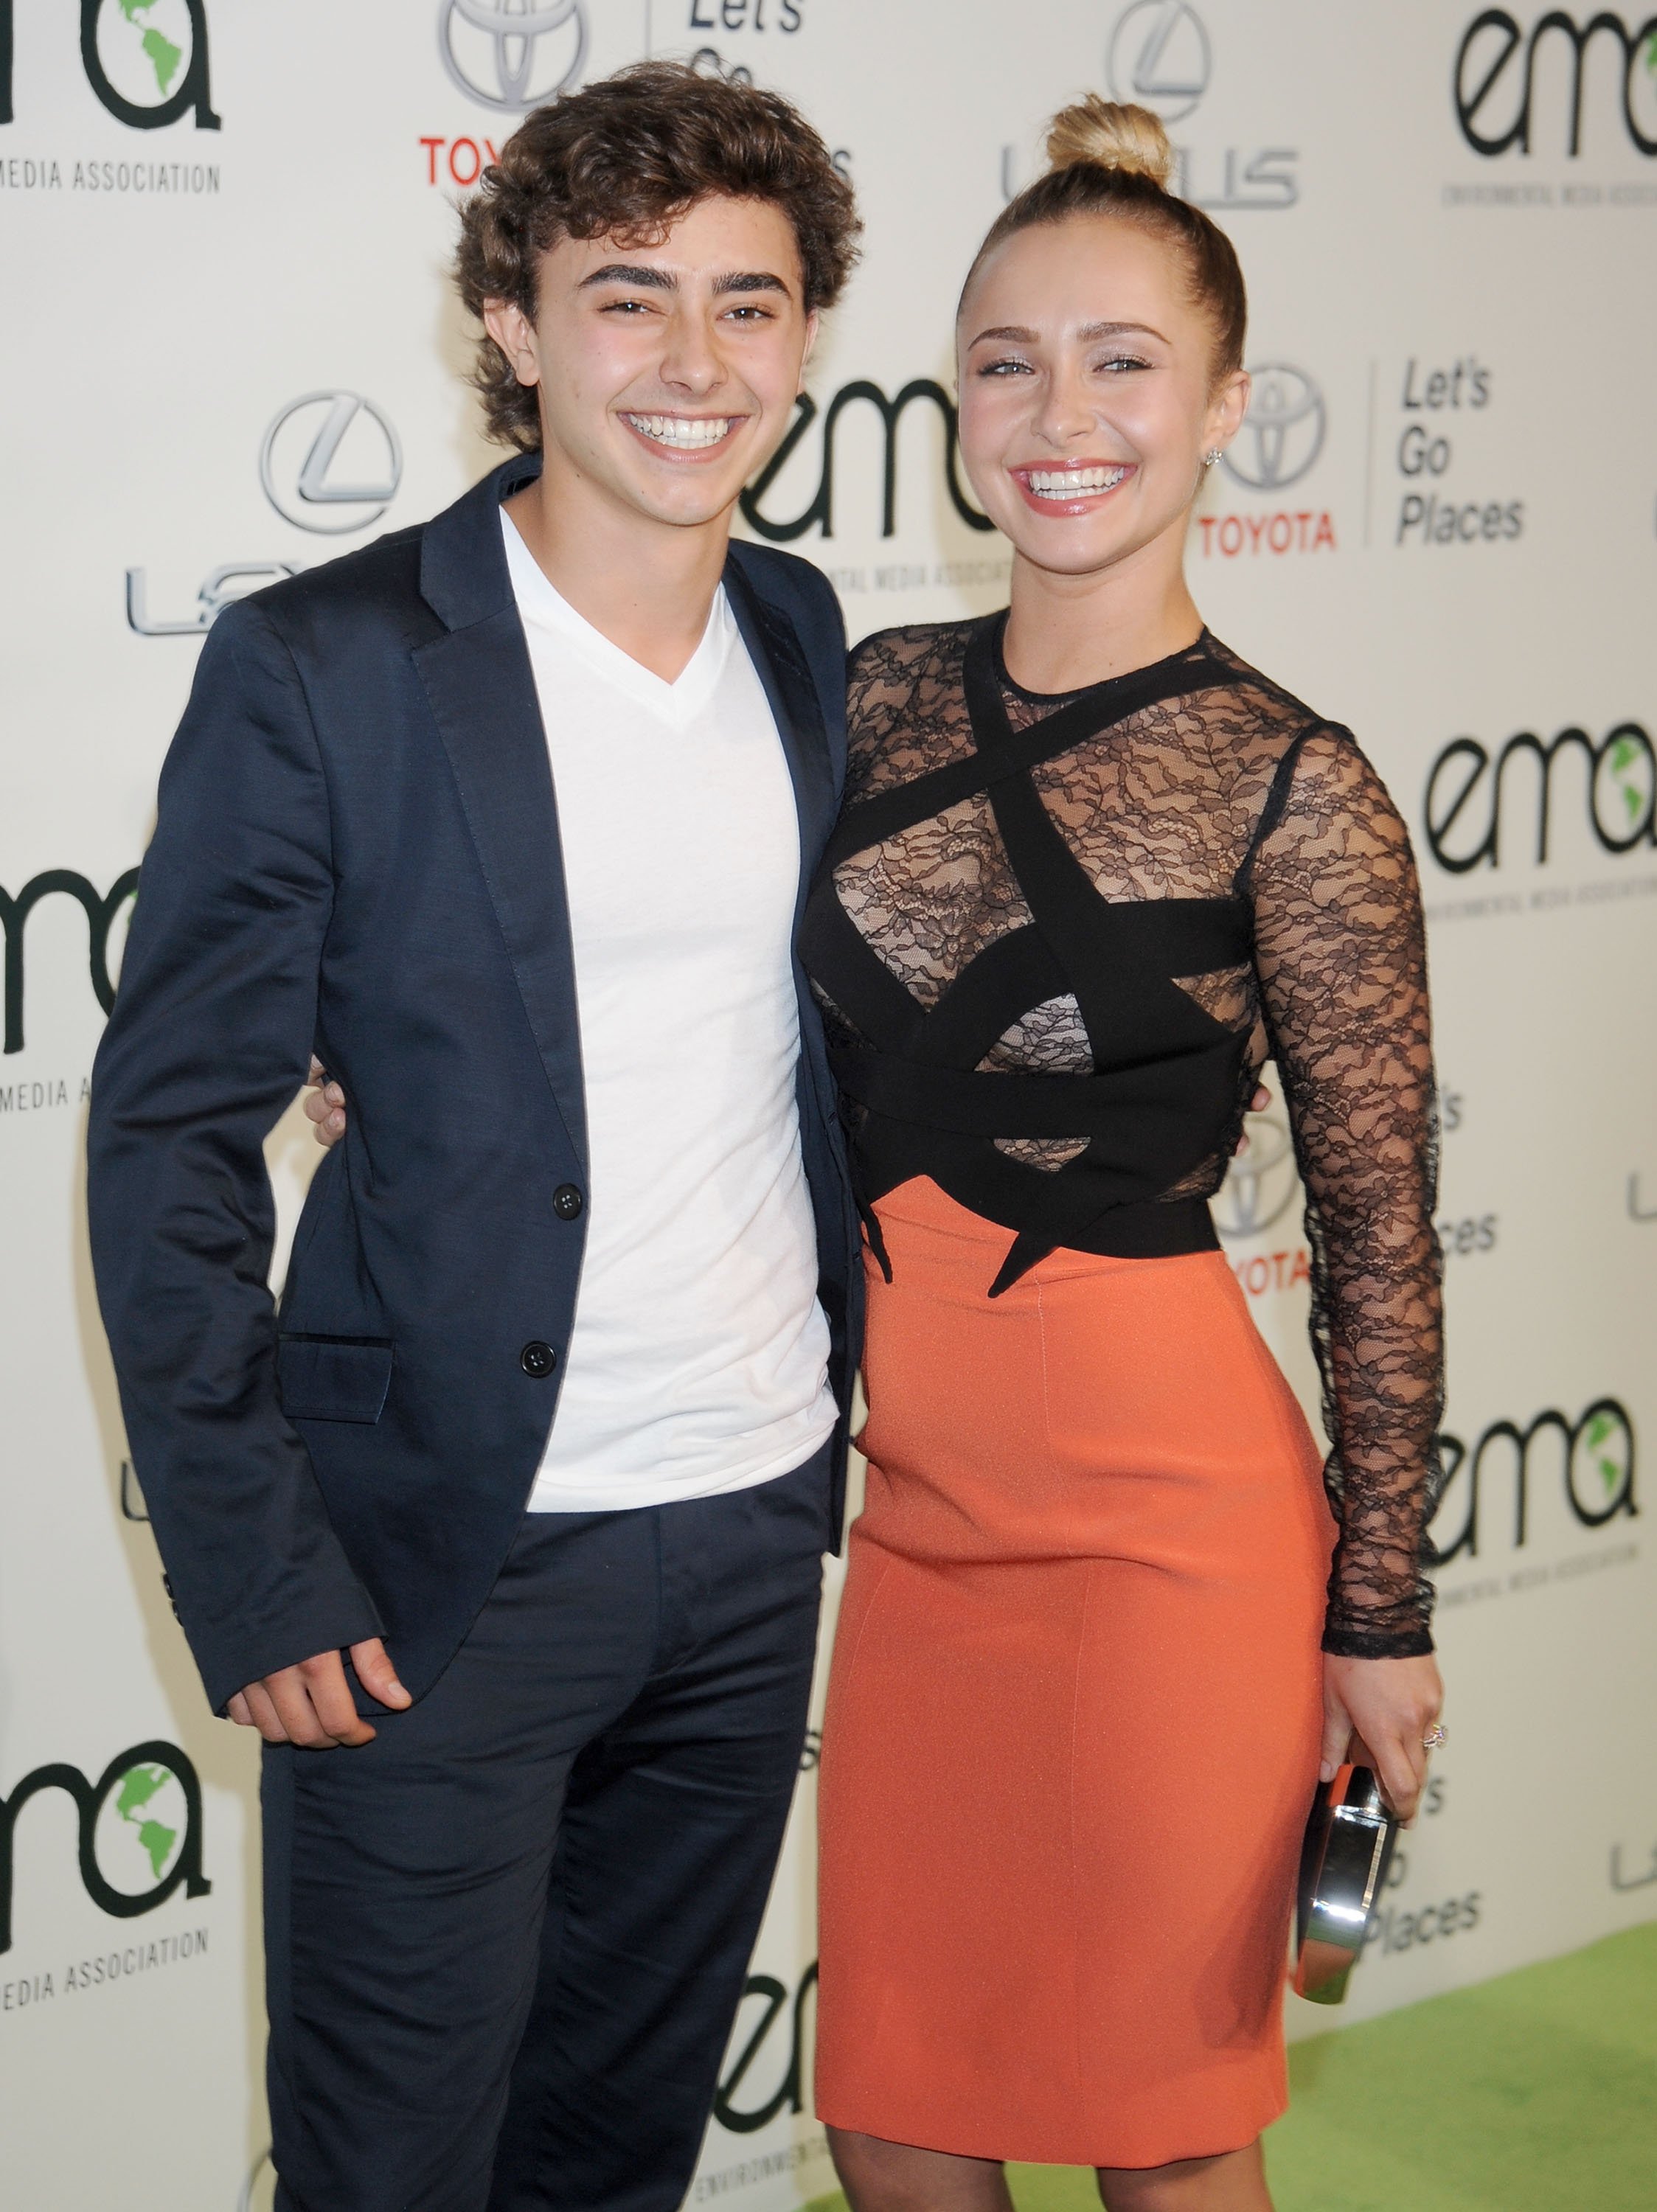 Actors Jansen Panettiere and his sister Hayden Panettiere arrive at the 2013 Environmental Media Awards at Warner Bros. Studios on October 19, 2013 in Burbank, California ┃Source: Getty Images